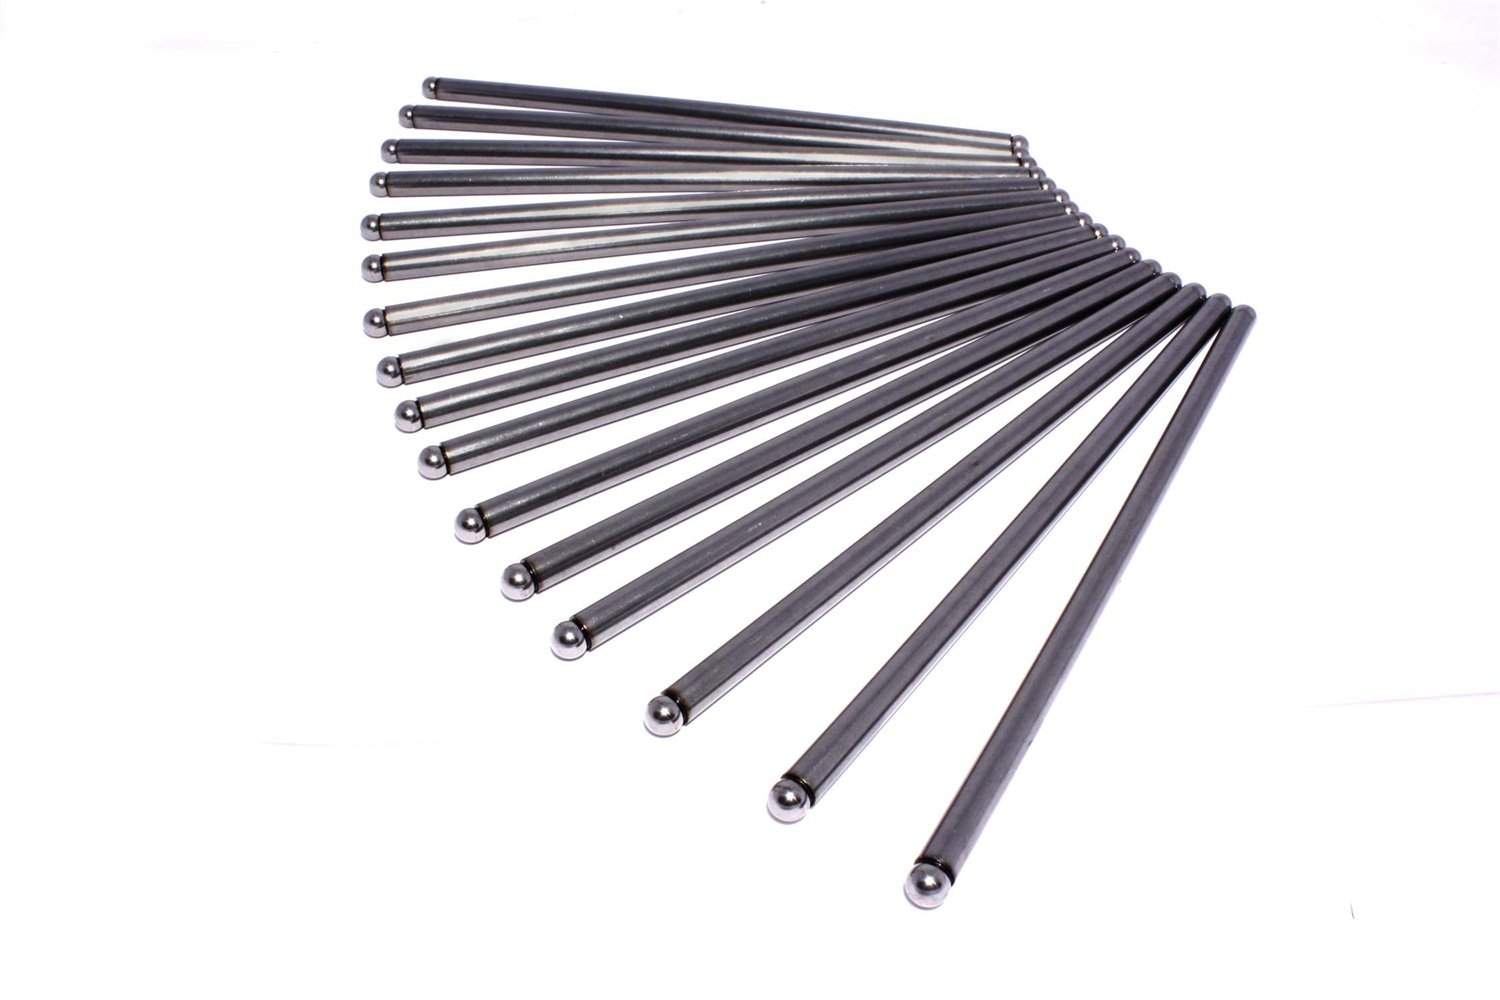 Competition Cams 784316 Hi-Energy Special Pushrods For Olds 350 & 403 1971-1979 